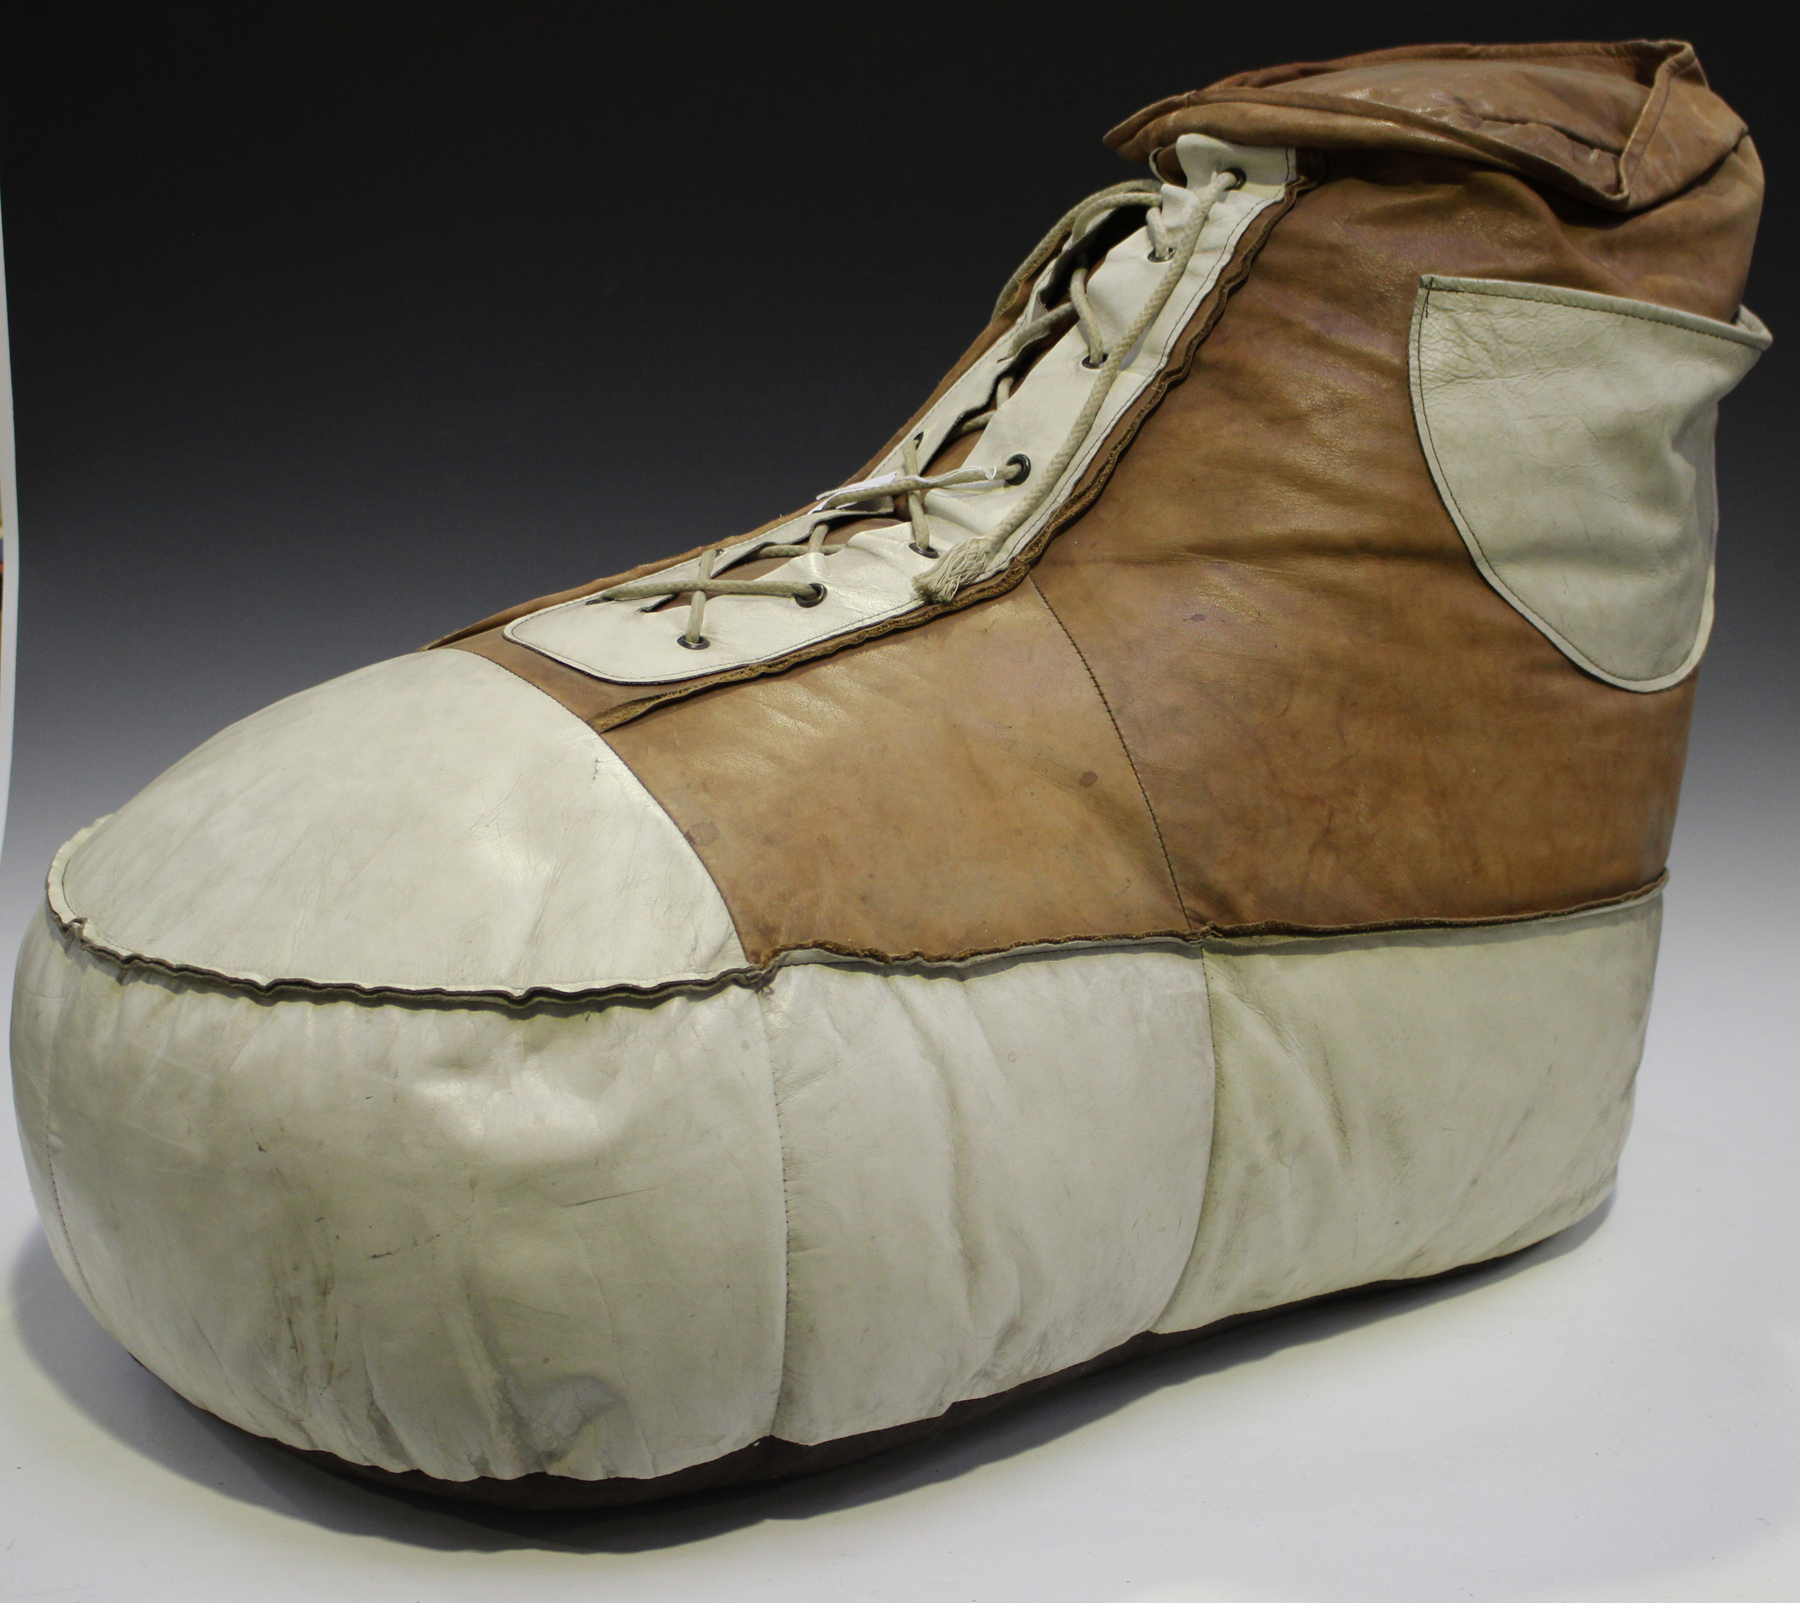 A mid-20th century advertising shop display model of a gentleman's shoe, inscribed 'Roblee',